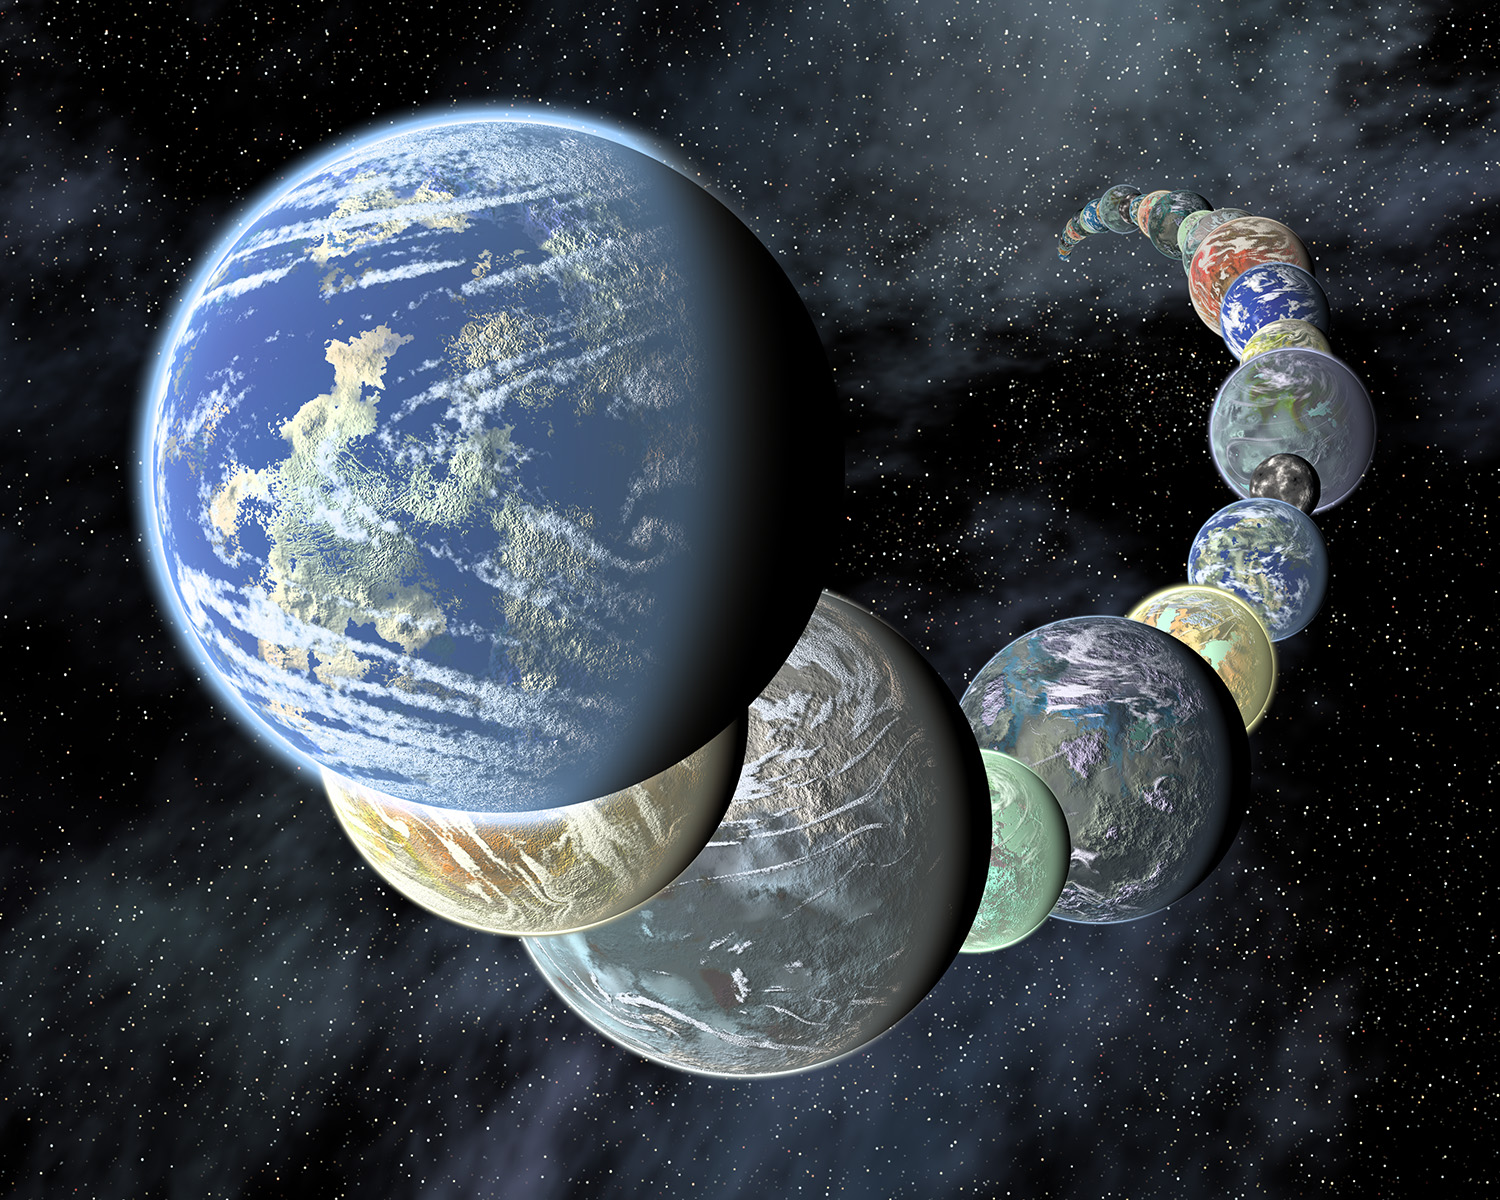 This artist's concept illustrates the idea that rocky, terrestrial worlds like the inner planets in our Solar System may be plentiful, and diverse, in the Universe.